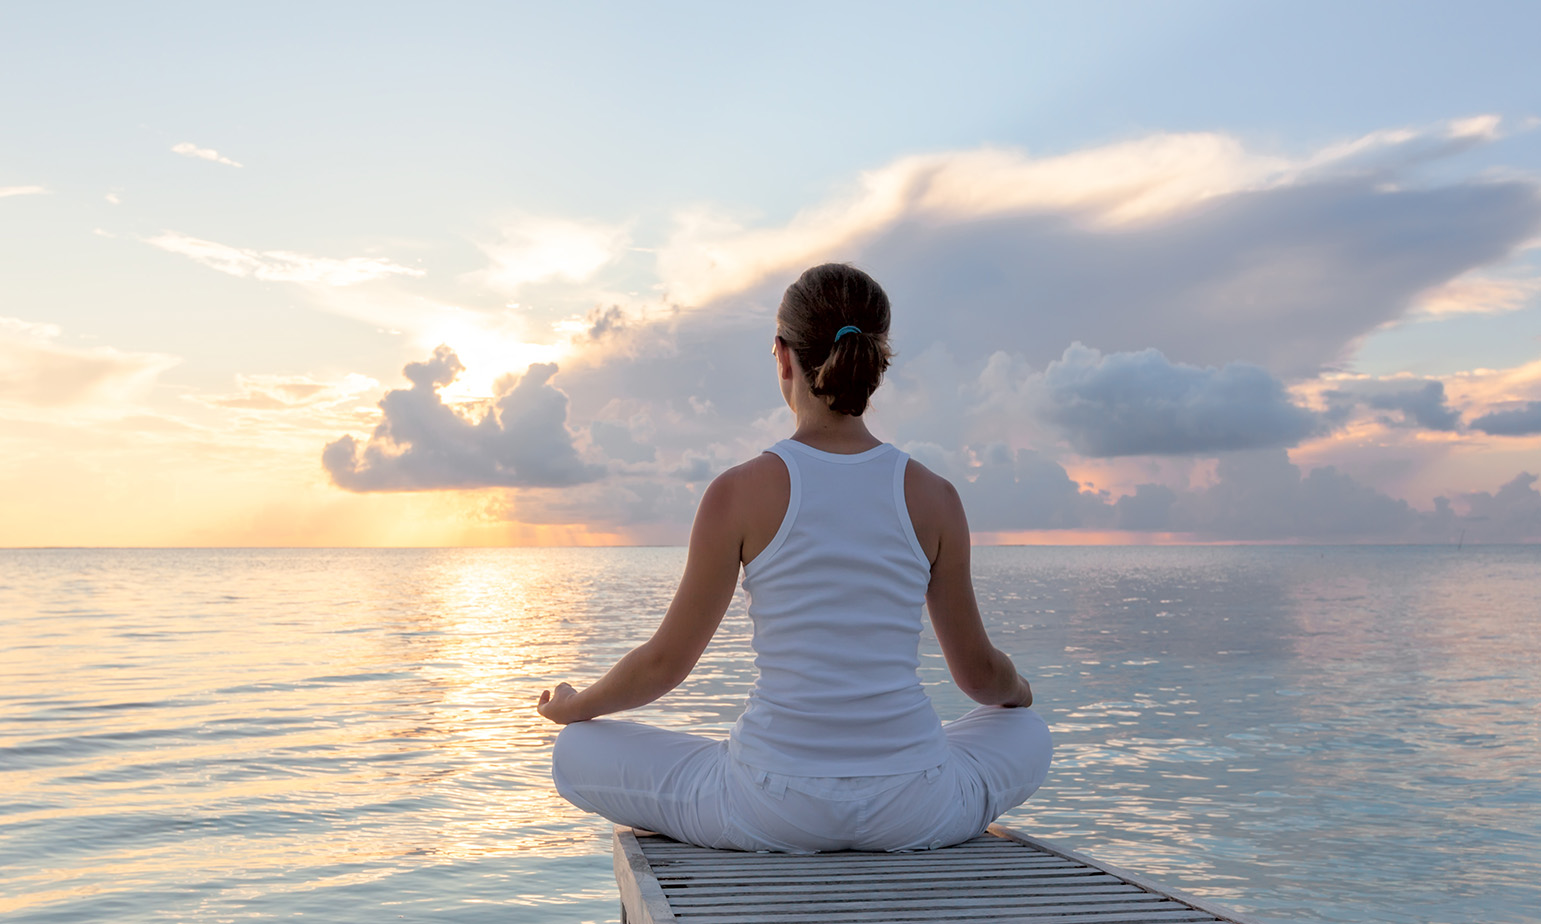 Woman at edge of dock, sitting in lotus position